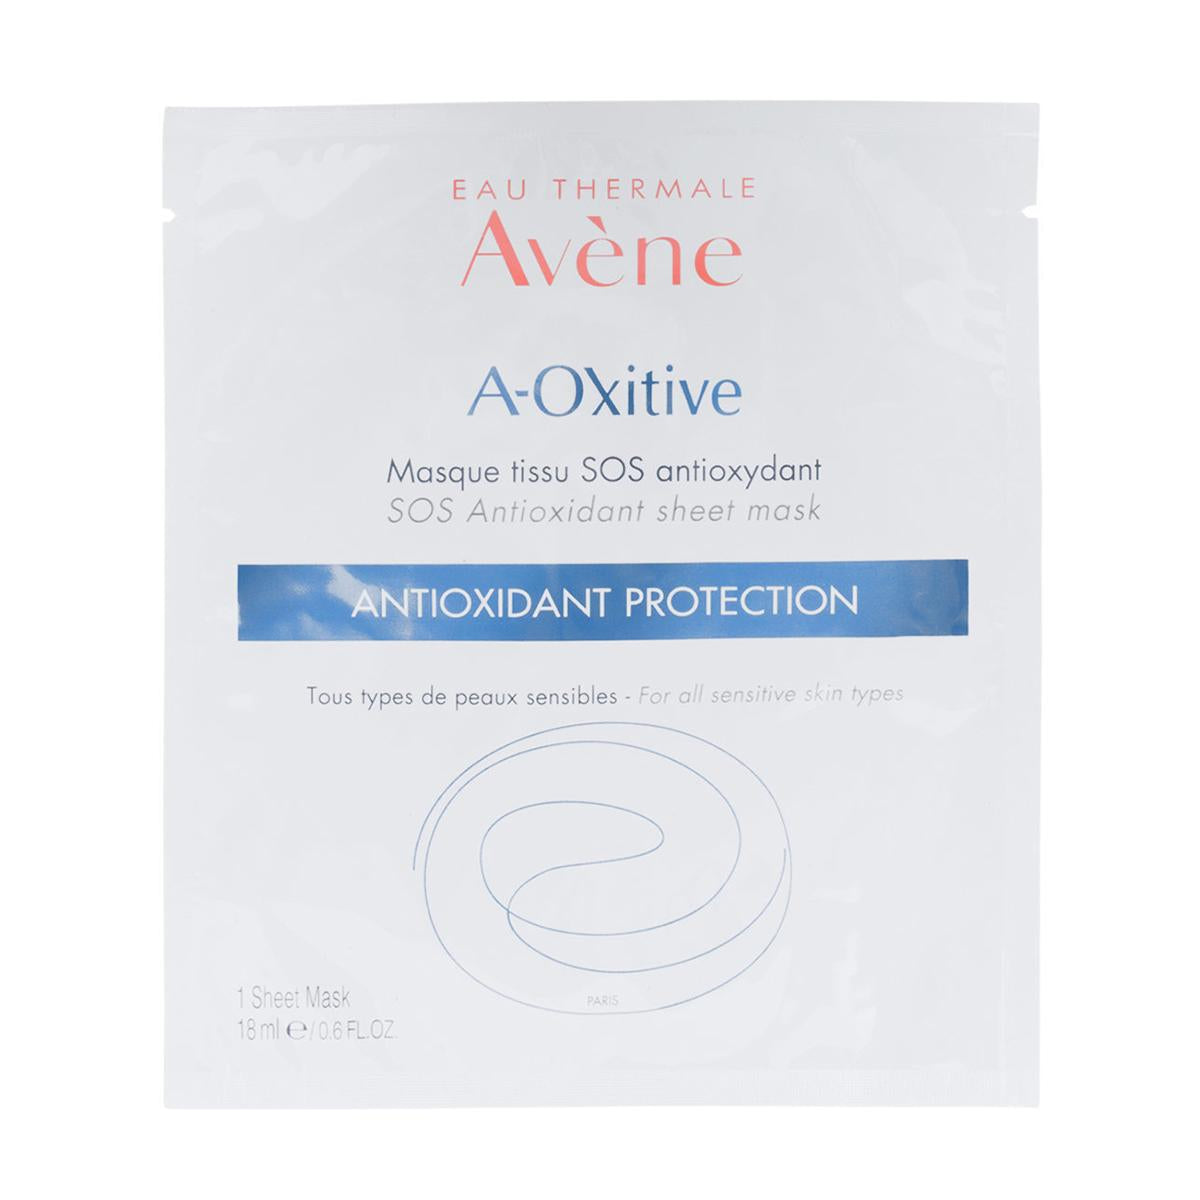 Primary image of A-Oxitive Sheet Mask